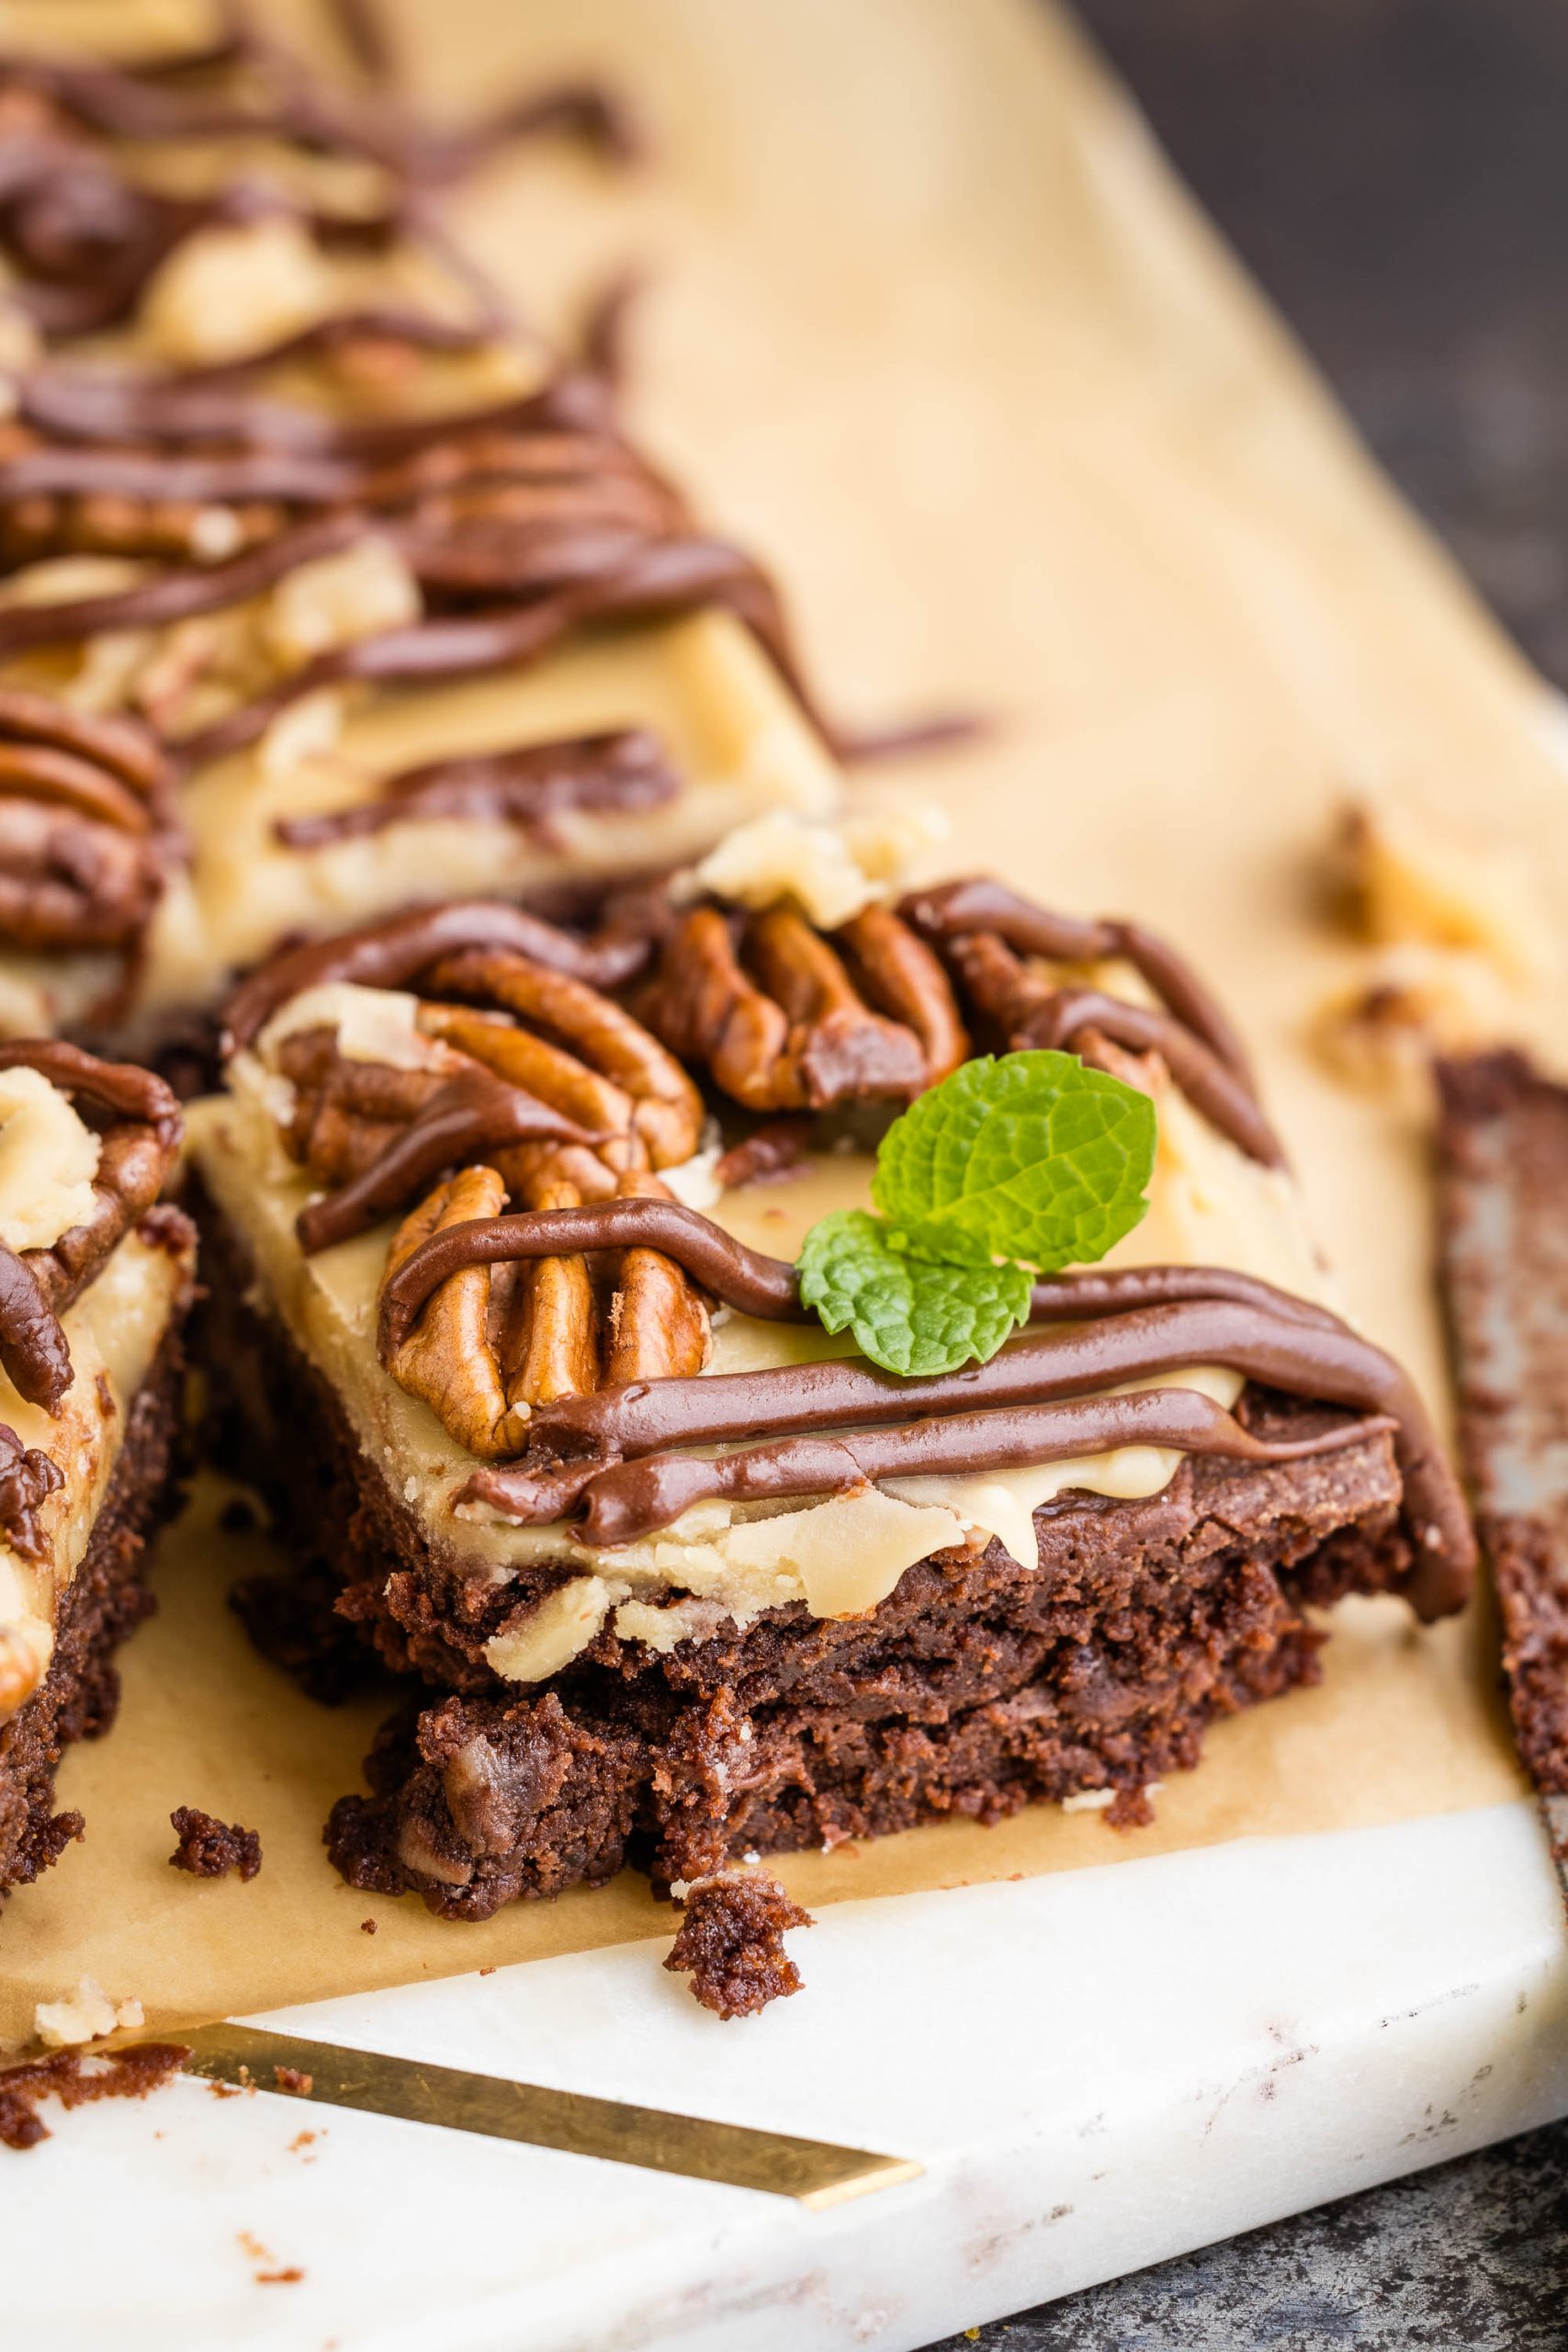 A slice of chocolate praline brownie with pecans and chocolate sauce.